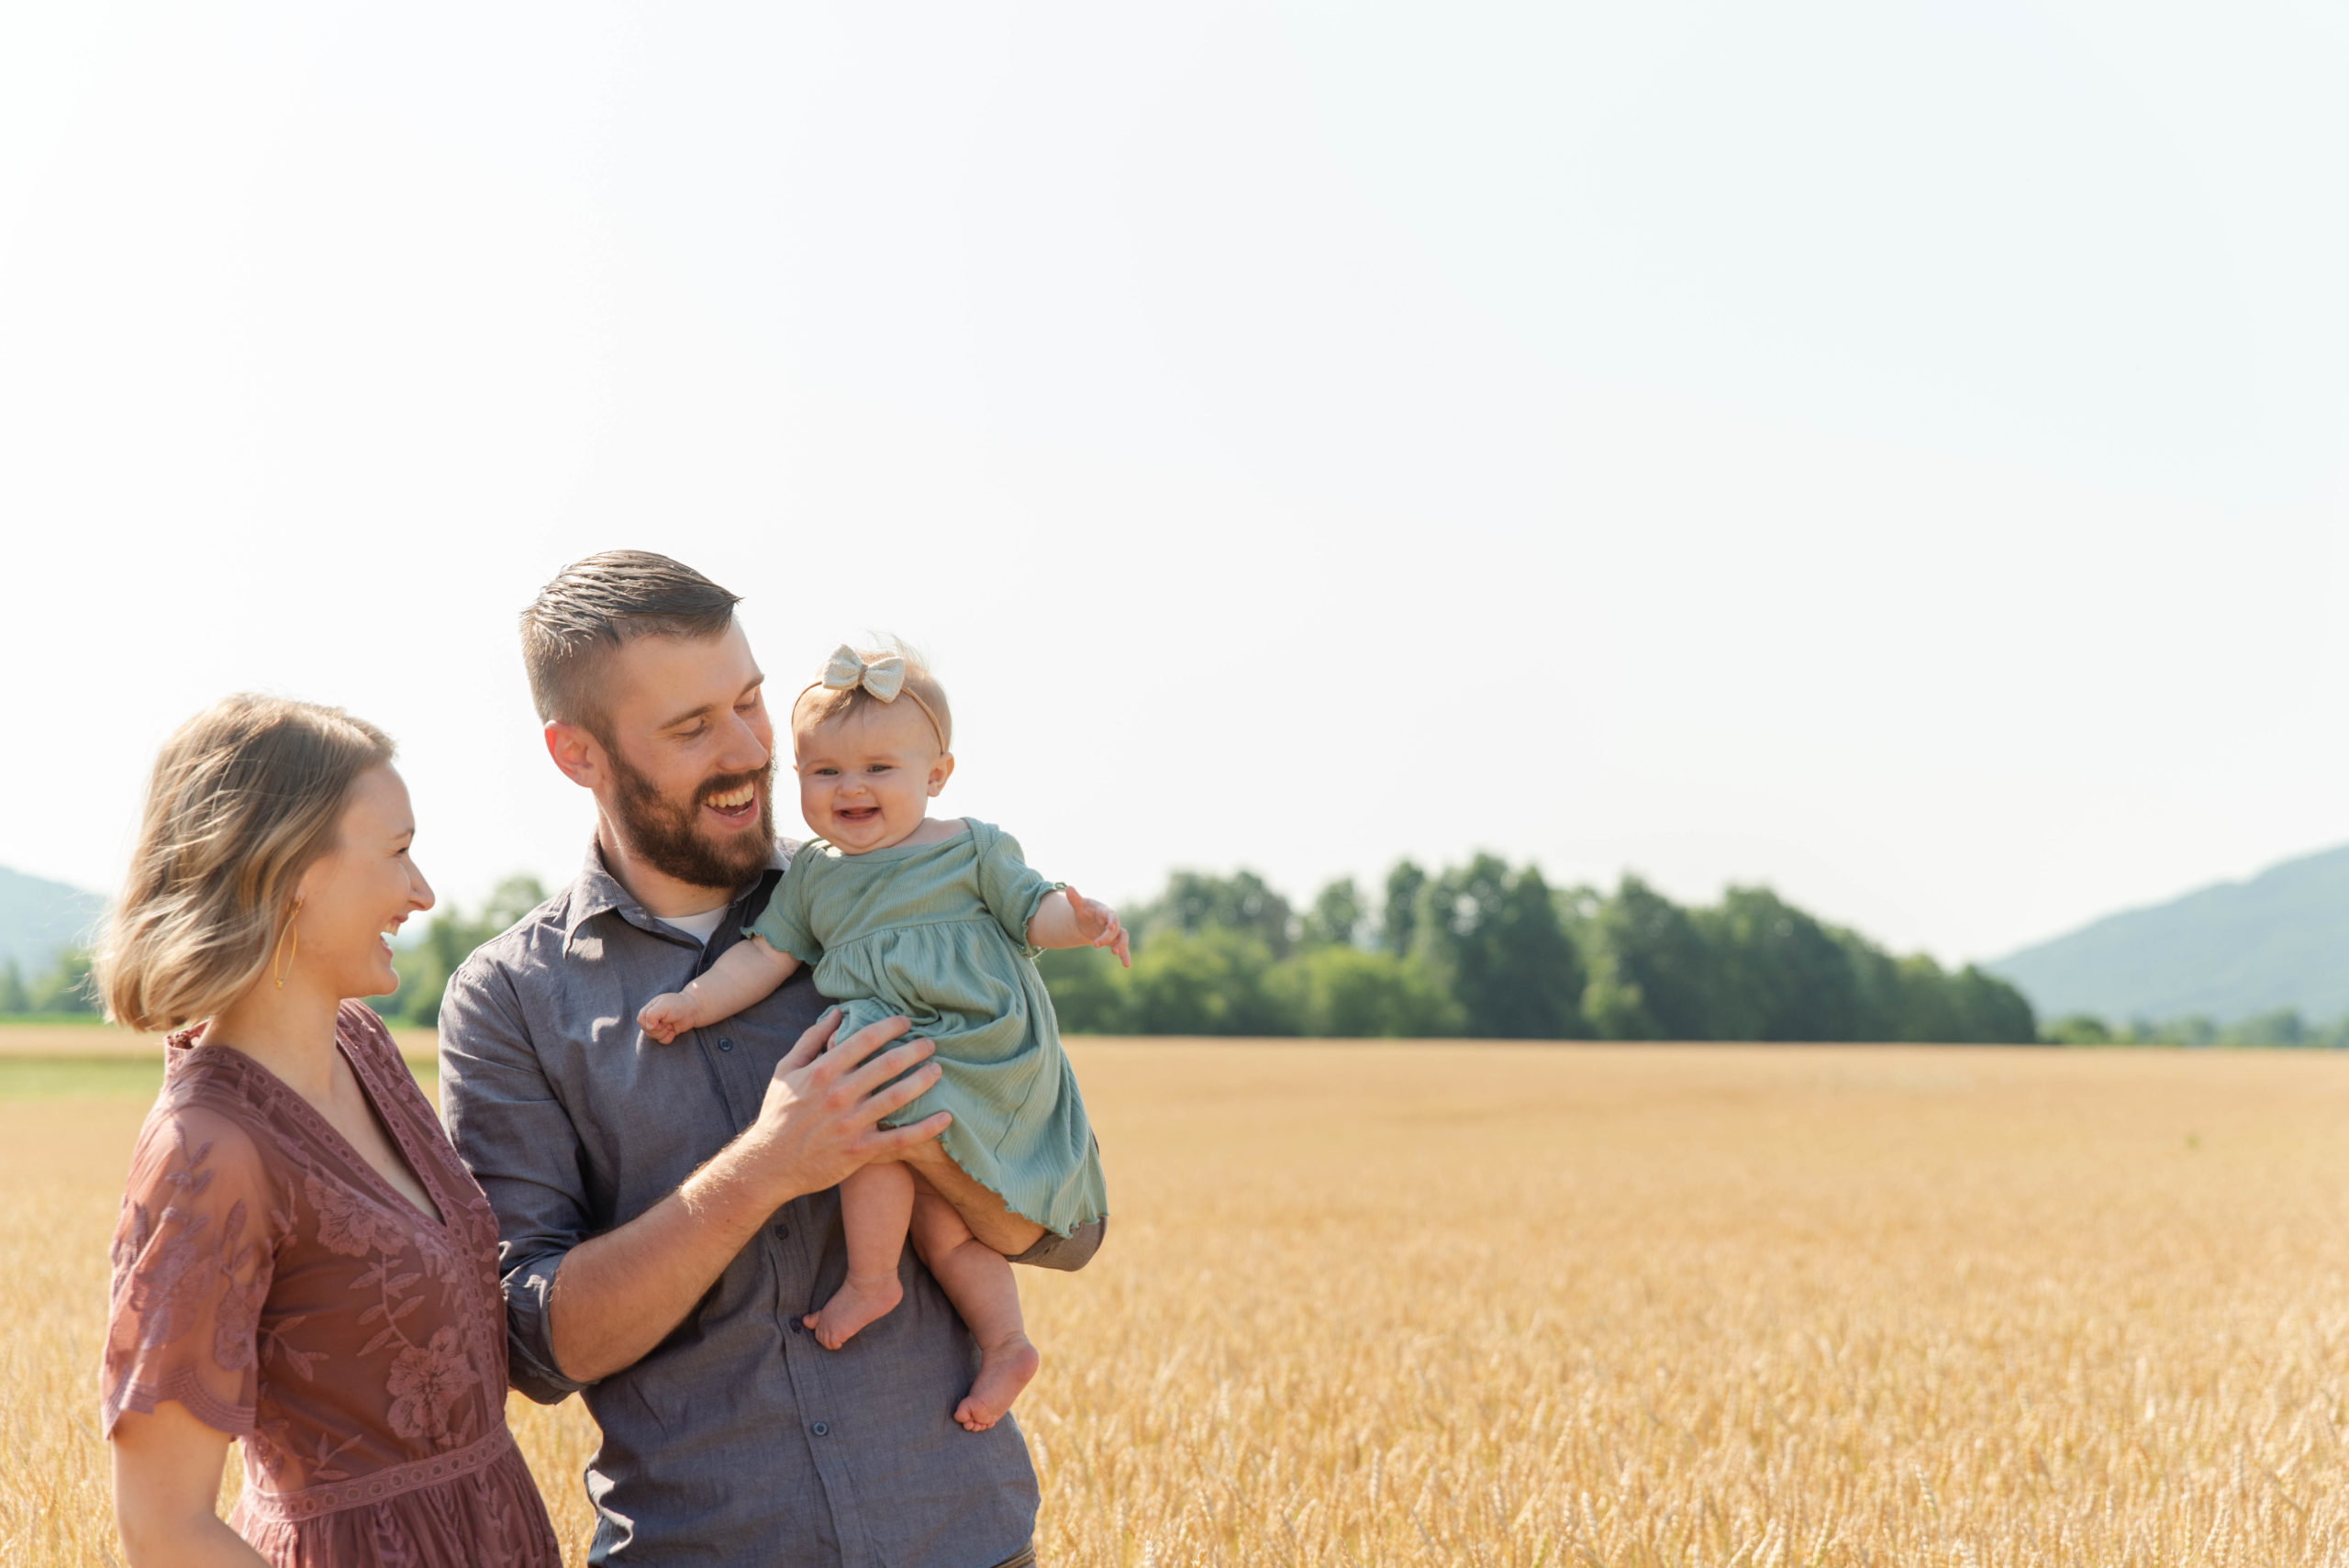 Mom, dad and baby laugh together while standing in a wheat field